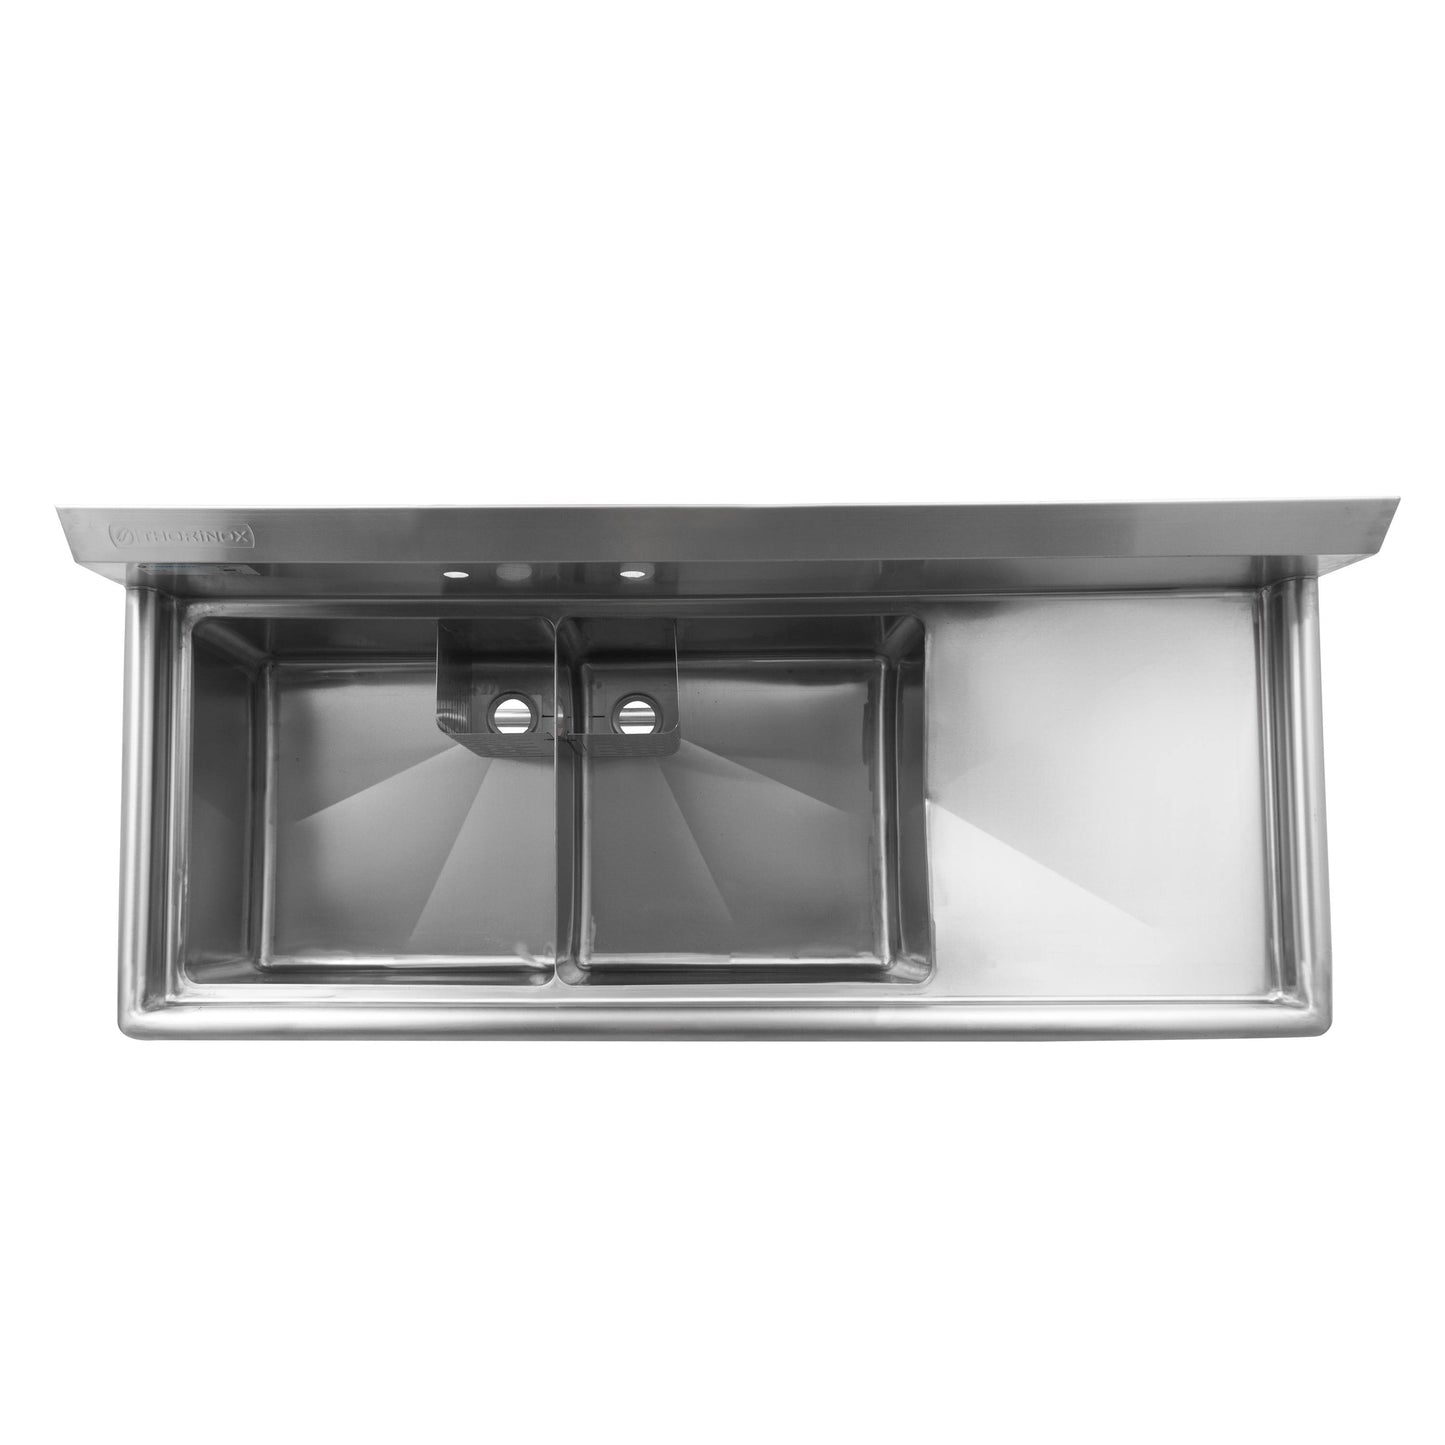 Double Sinks with R Drainboard